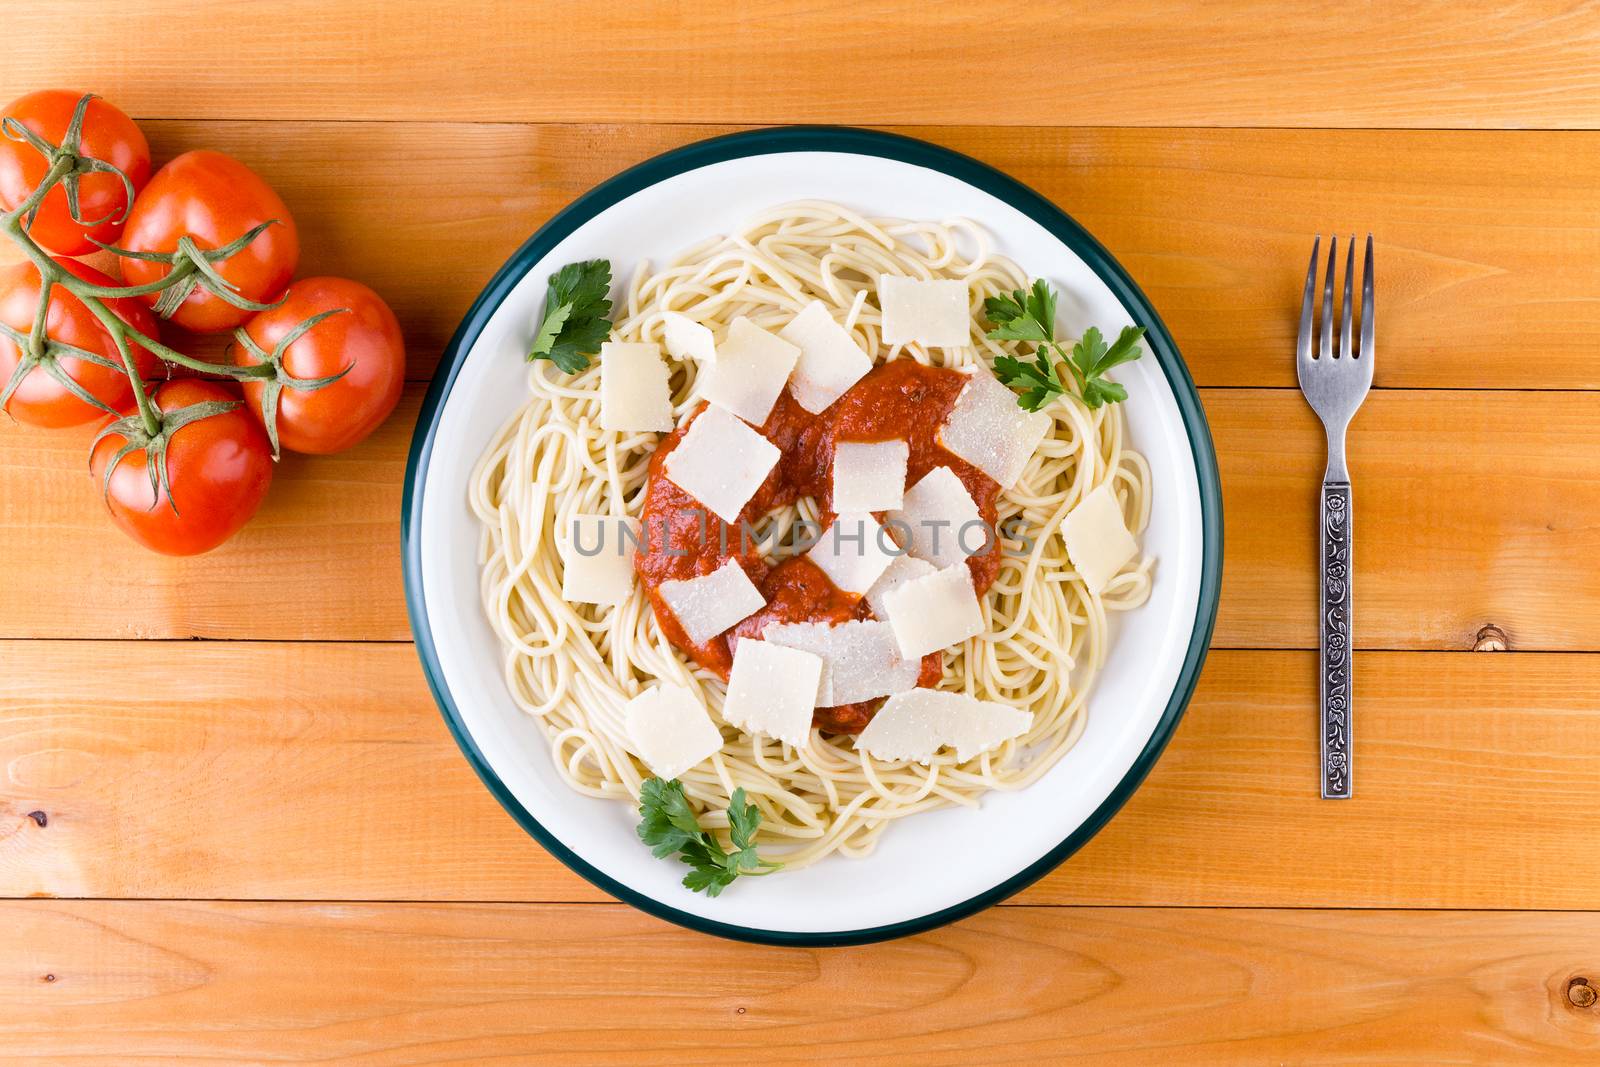 Spaghetti pasta with tomato sauce and cheese by coskun